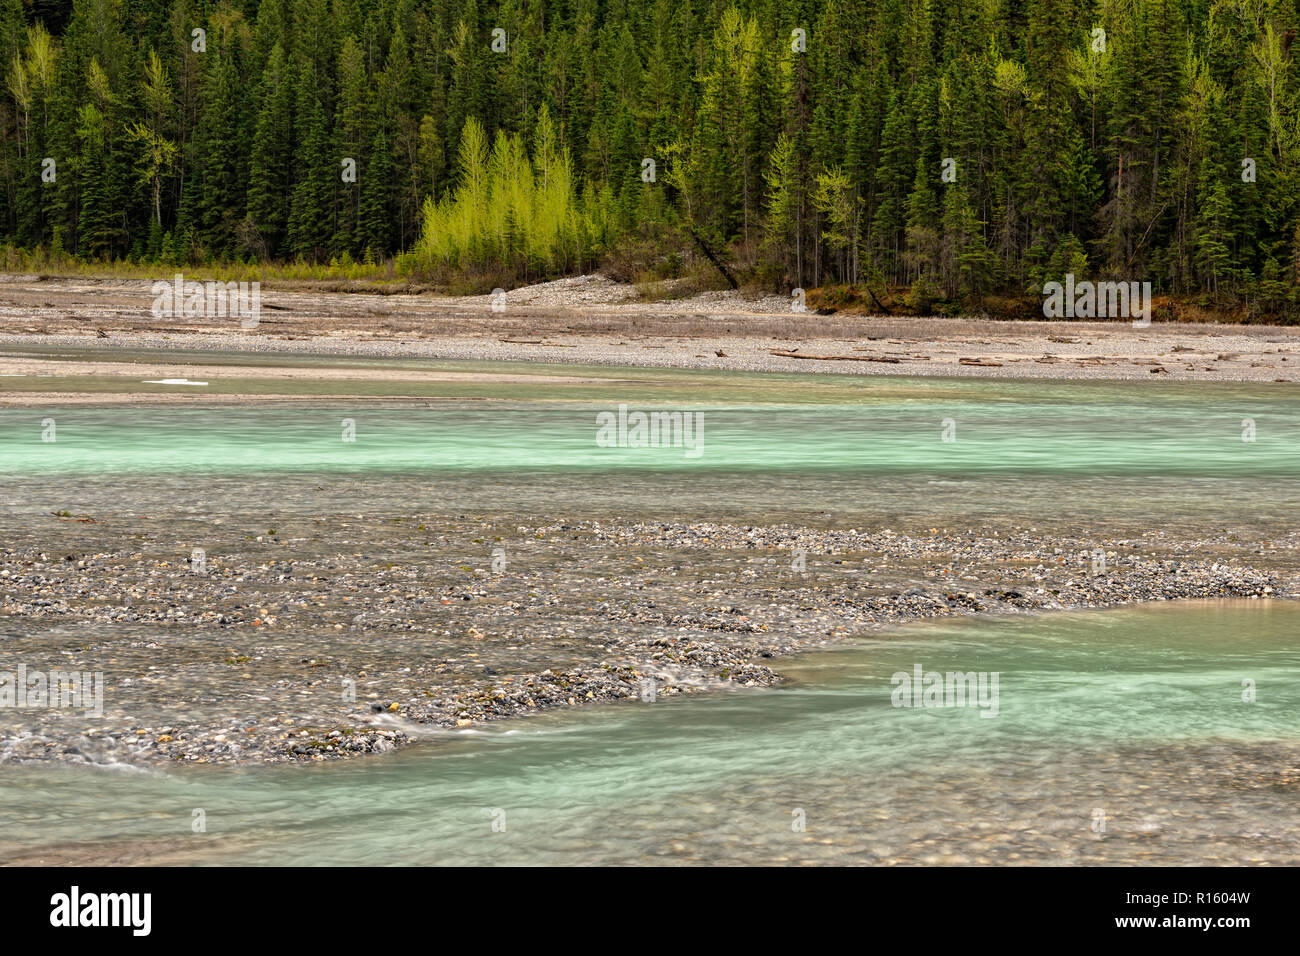 Gravel beds and river channels in the Kicking Horse River Valley, Yoho National Park, BC, Canada Stock Photo